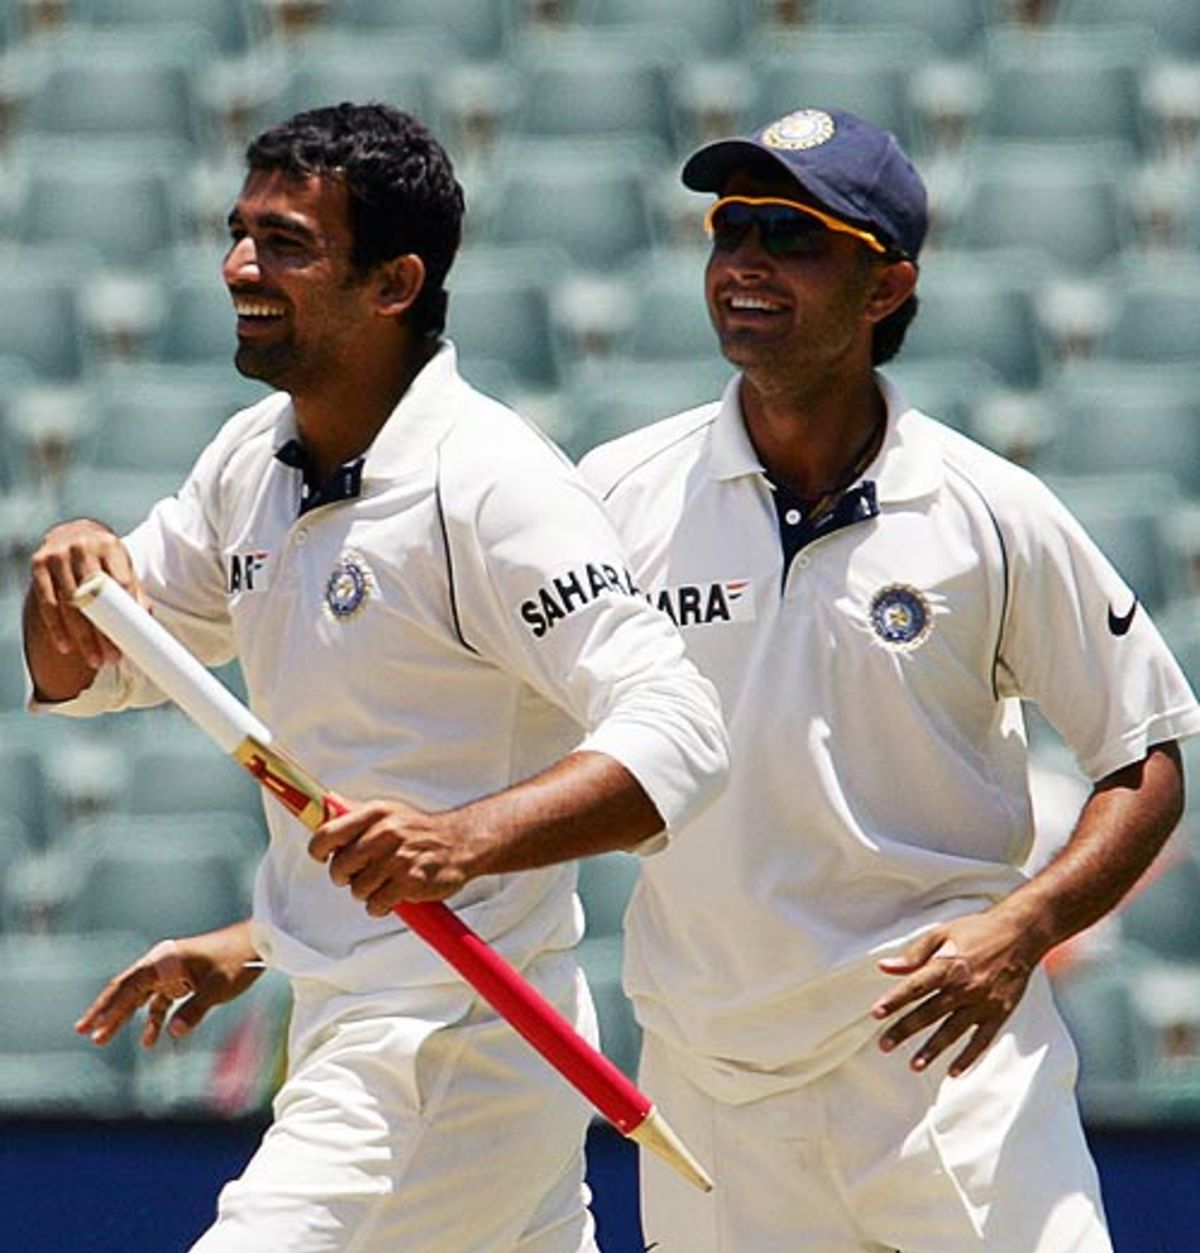 Comeback men Zaheer Khan and Sourav Ganguly savour the win, South Africa v India, 1st Test, Johannesburg, 4th day, December 18, 2006